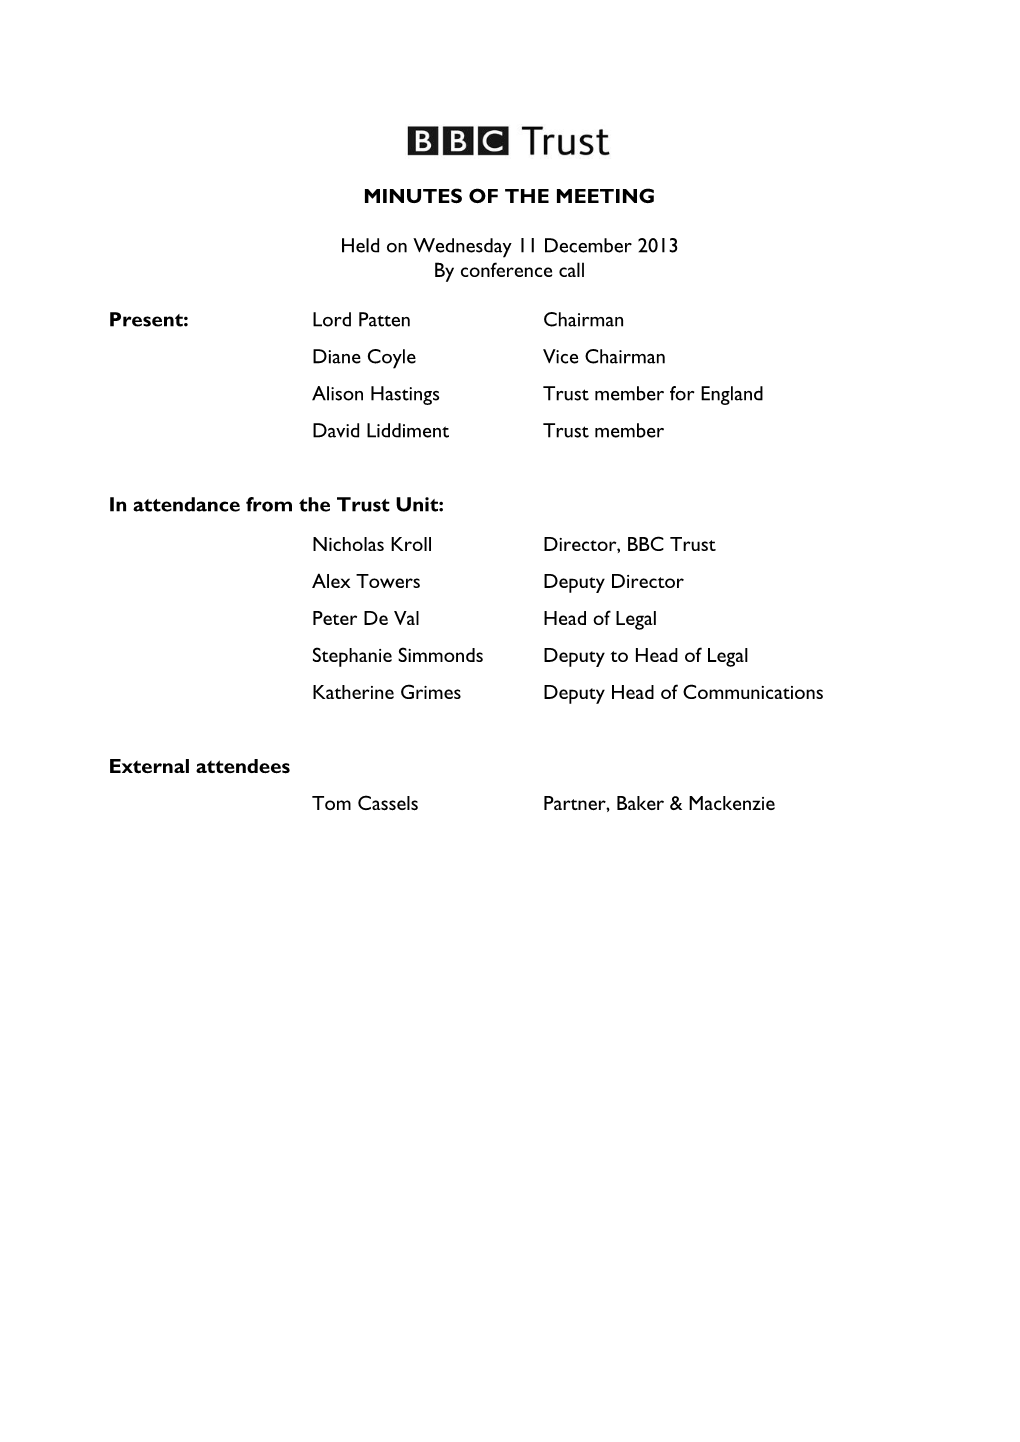 MINUTES of the MEETING Held on Wednesday 11 December 2013 By